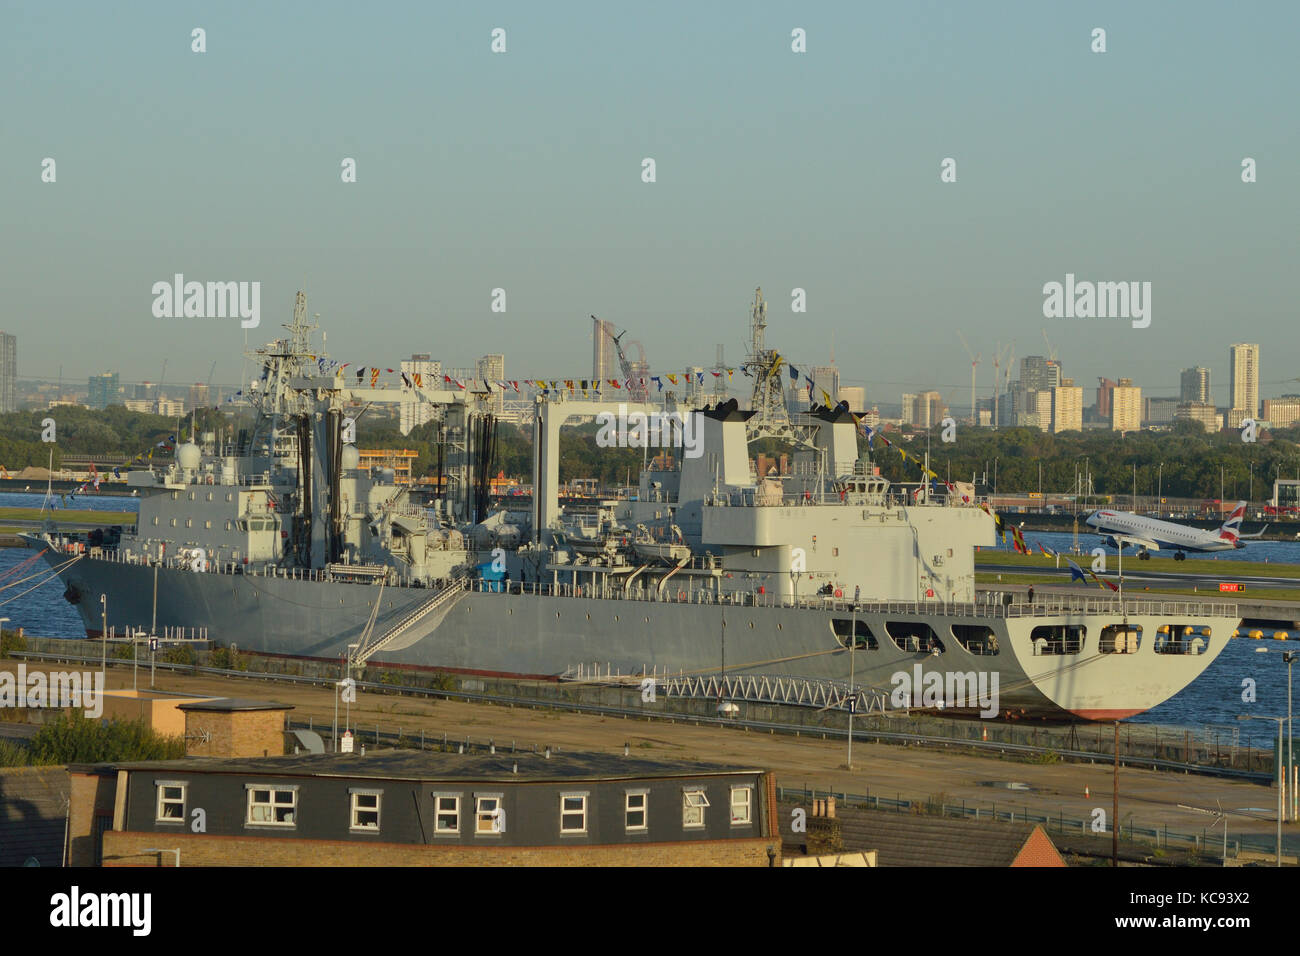 Chinese Navy Replenishment Ship PLAN Gaoyouhu AOR 966 moored in the King George V Dock in London's Royal Docks during a port call Stock Photo